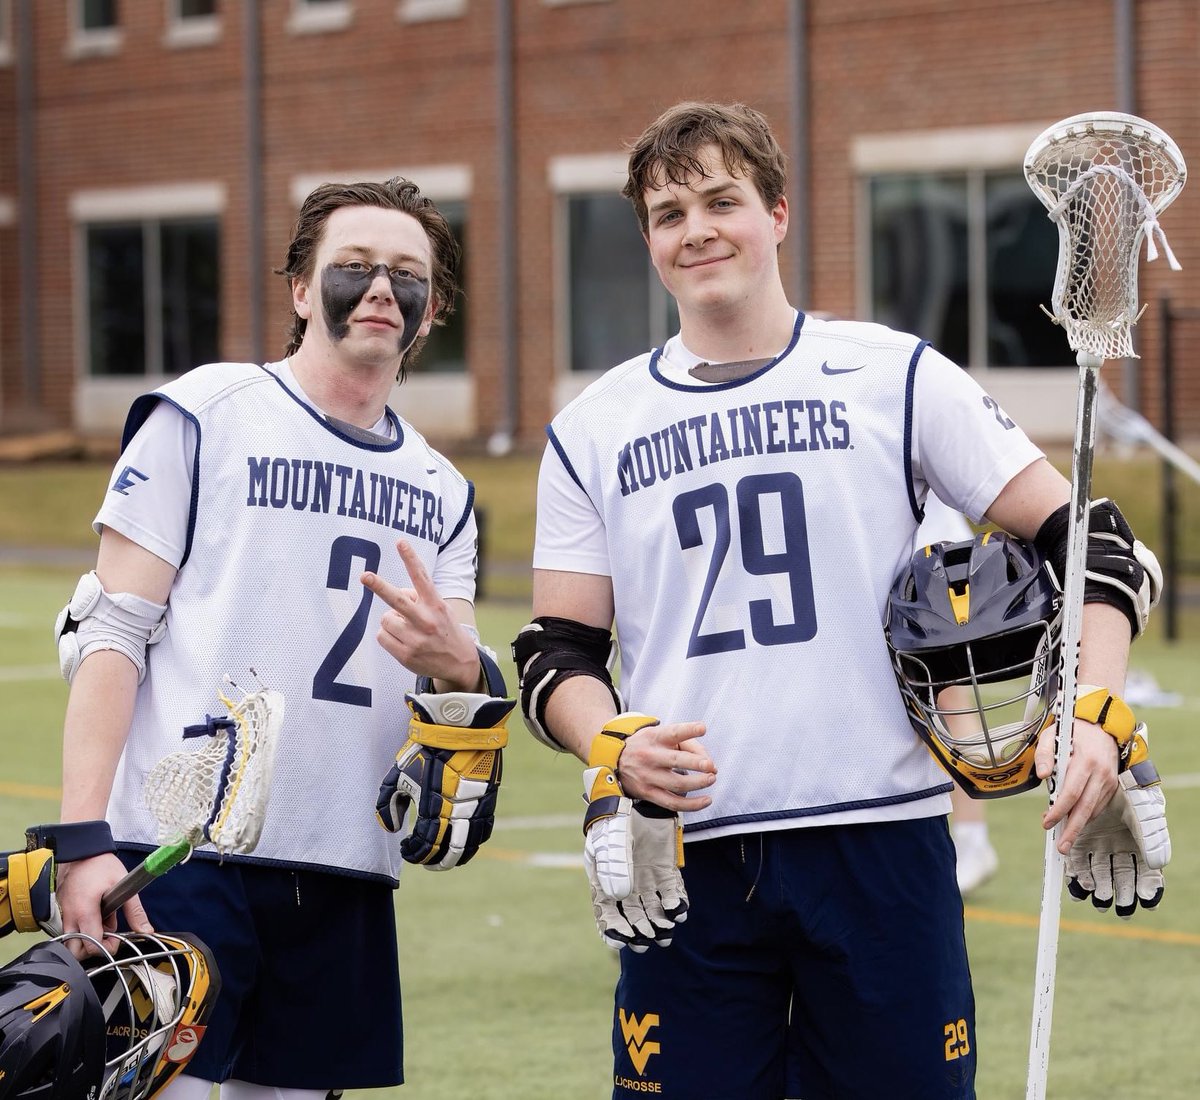 This week we celebrate our Seniors! Long Stick Midfielder #2 Bobby O’Neill hails Rhode Island and has given 110% since donning the old gold and blue. Close Defender and VP #29 David Colangelo has been a four year pillar of leadership and consistency. #letsgo 📸 @akavanna